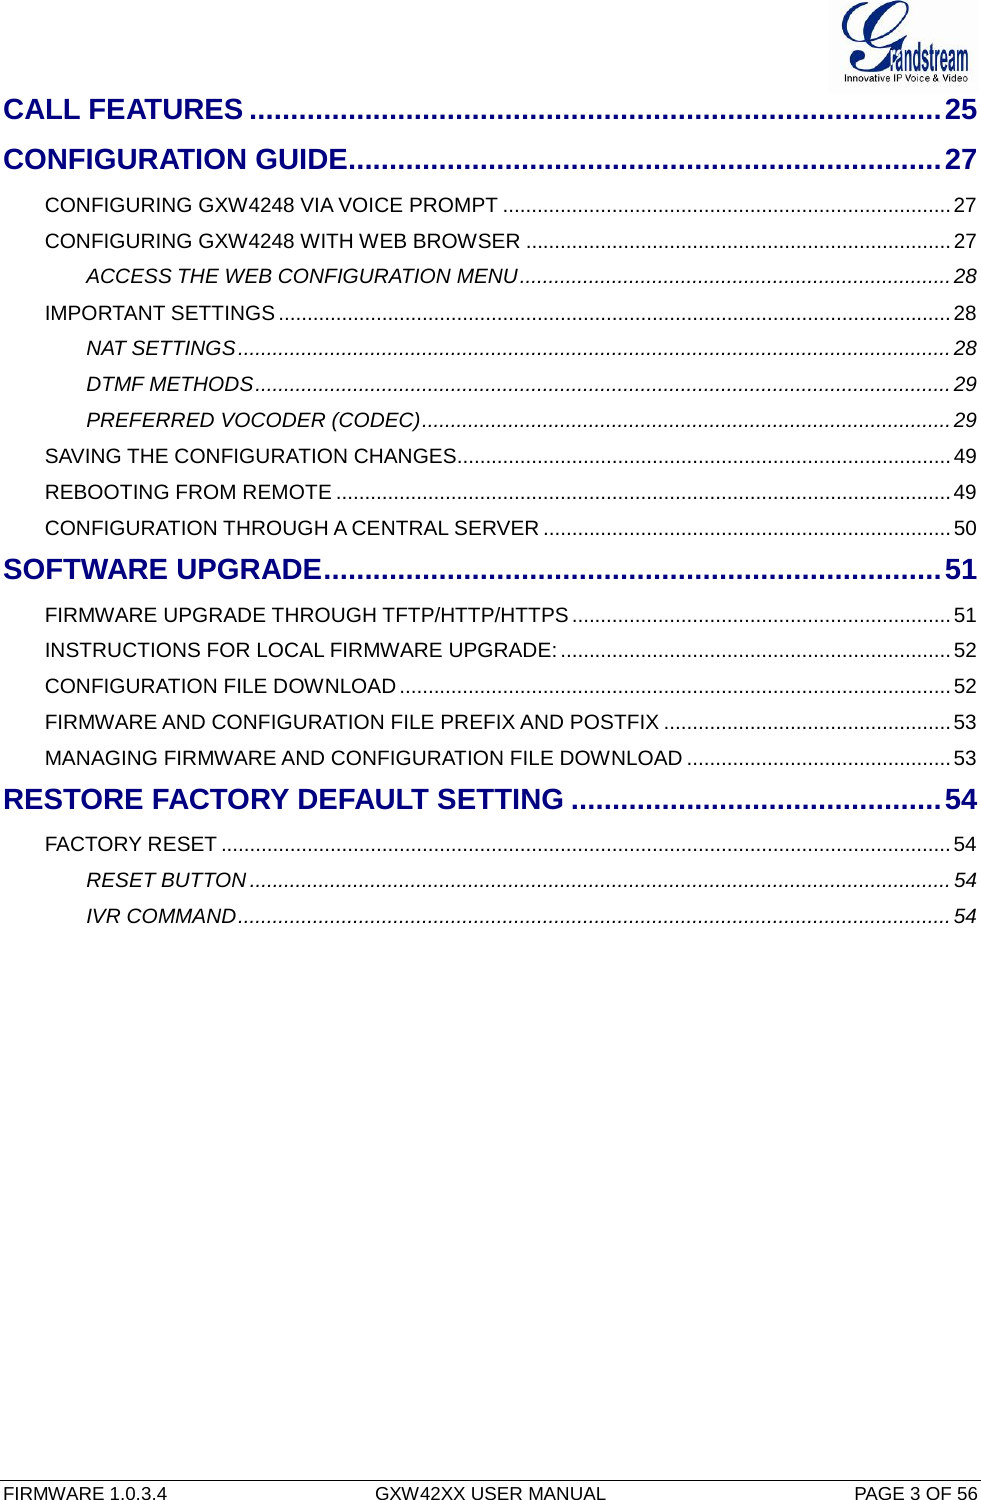  FIRMWARE 1.0.3.4  GXW42XX USER MANUAL  PAGE 3 OF 56      CALL FEATURES .................................................................................... 25 CONFIGURATION GUIDE ........................................................................ 27 CONFIGURING GXW4248 VIA VOICE PROMPT .............................................................................. 27 CONFIGURING GXW4248 WITH WEB BROWSER .......................................................................... 27 ACCESS THE WEB CONFIGURATION MENU ........................................................................... 28 IMPORTANT SETTINGS ..................................................................................................................... 28 NAT SETTINGS ............................................................................................................................ 28 DTMF METHODS ......................................................................................................................... 29 PREFERRED VOCODER (CODEC) ............................................................................................ 29 SAVING THE CONFIGURATION CHANGES...................................................................................... 49 REBOOTING FROM REMOTE ........................................................................................................... 49 CONFIGURATION THROUGH A CENTRAL SERVER ....................................................................... 50 SOFTWARE UPGRADE ........................................................................... 51 FIRMWARE UPGRADE THROUGH TFTP/HTTP/HTTPS .................................................................. 51 INSTRUCTIONS FOR LOCAL FIRMWARE UPGRADE: .................................................................... 52 CONFIGURATION FILE DOWNLOAD ................................................................................................ 52 FIRMWARE AND CONFIGURATION FILE PREFIX AND POSTFIX .................................................. 53 MANAGING FIRMWARE AND CONFIGURATION FILE DOWNLOAD .............................................. 53 RESTORE FACTORY DEFAULT SETTING ............................................. 54 FACTORY RESET ............................................................................................................................... 54 RESET BUTTON .......................................................................................................................... 54 IVR COMMAND ............................................................................................................................ 54     